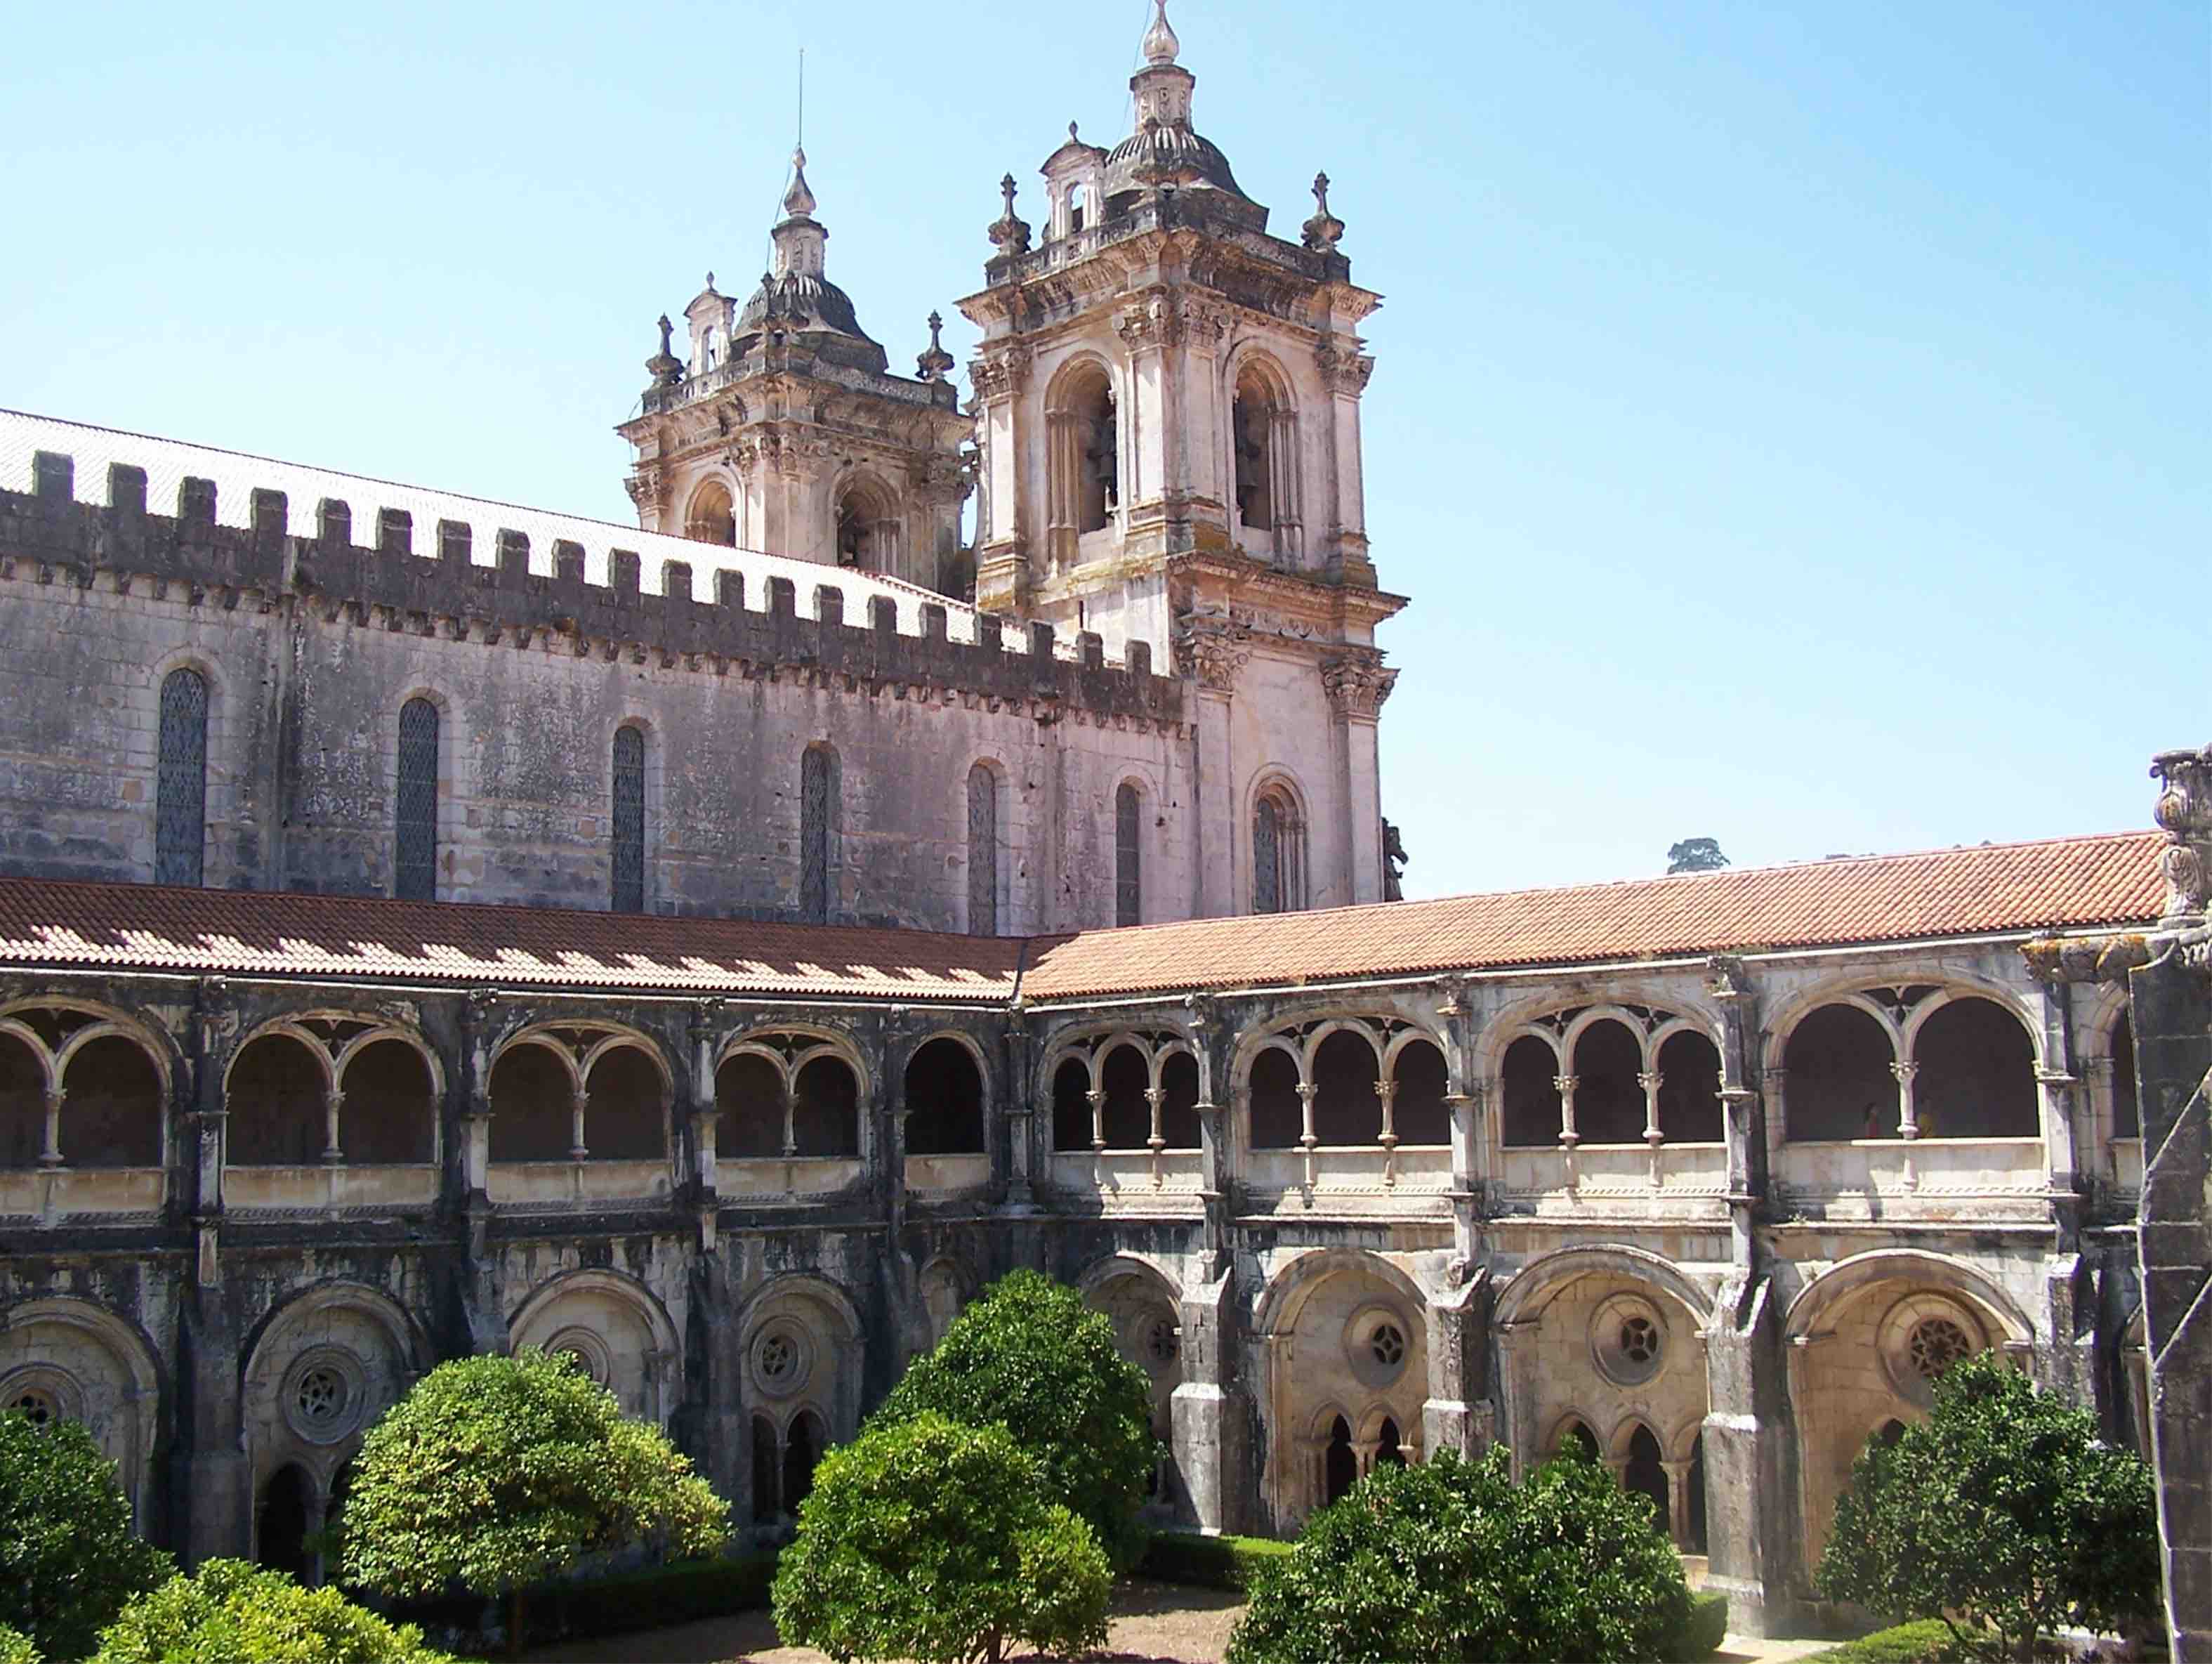 Cloister of the Monastery of Alcobaça. Photo by Flávio de Souza on <a href='https://commons.wikimedia.org/wiki/File:Alcoba%C3%A7aCloister.jpg'>Wikimedia Commons</a>, (Public Domain)